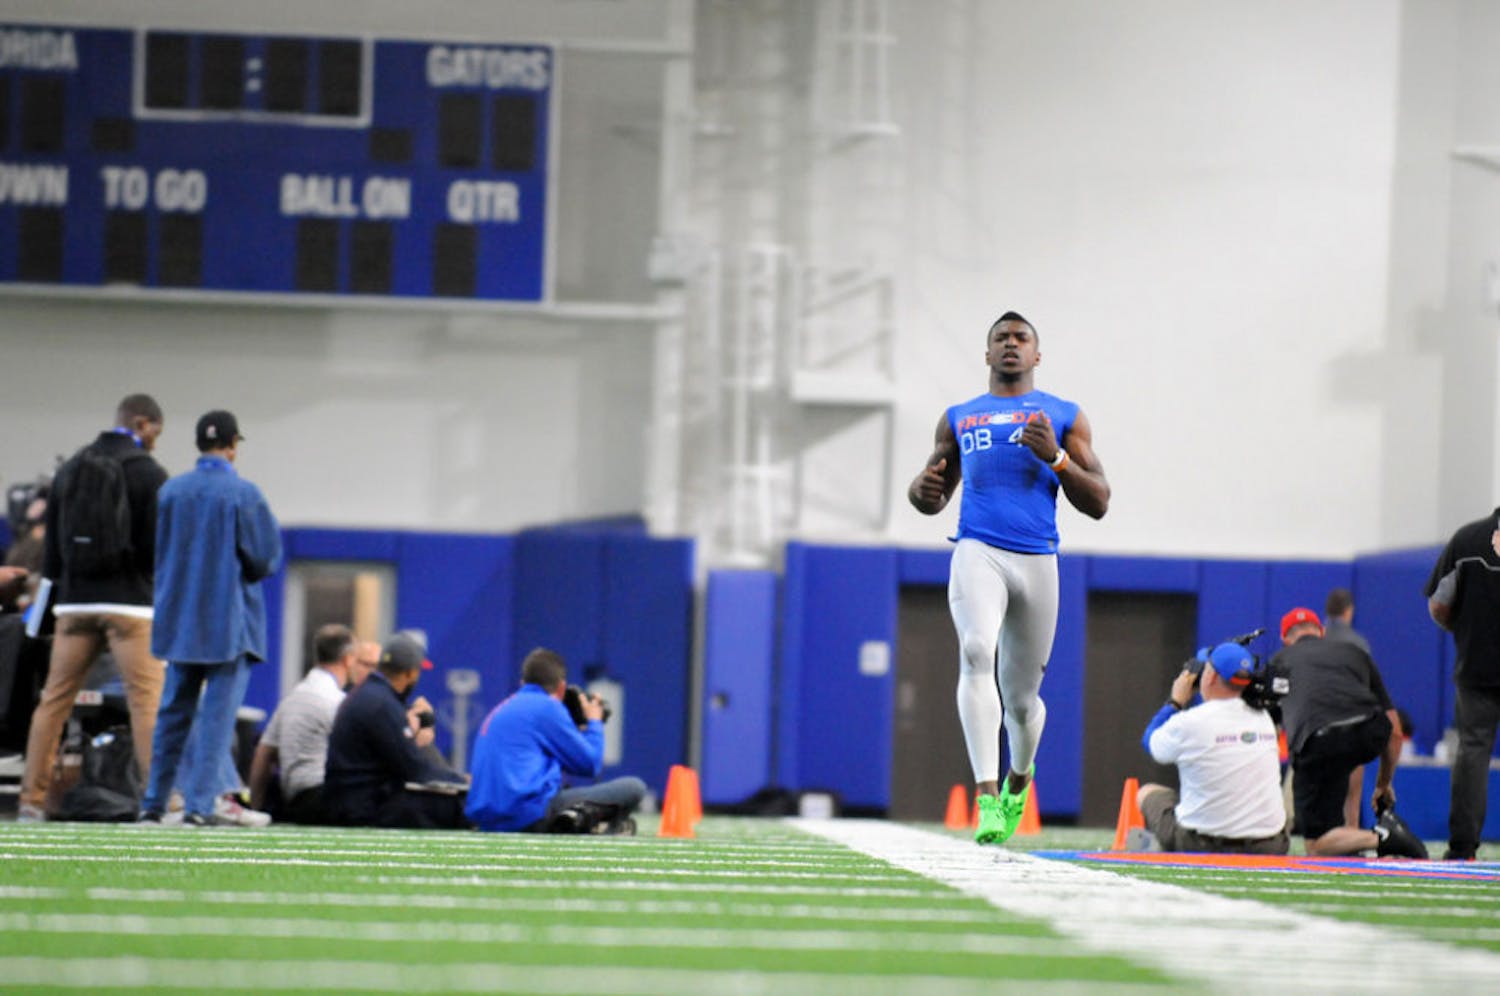 Eighteen UF football players, 15 of whom were on the team last season, practiced in front of 70 scouts and assistant coaches representing all 32 NFL teams ahead of May’s NFL Draft.